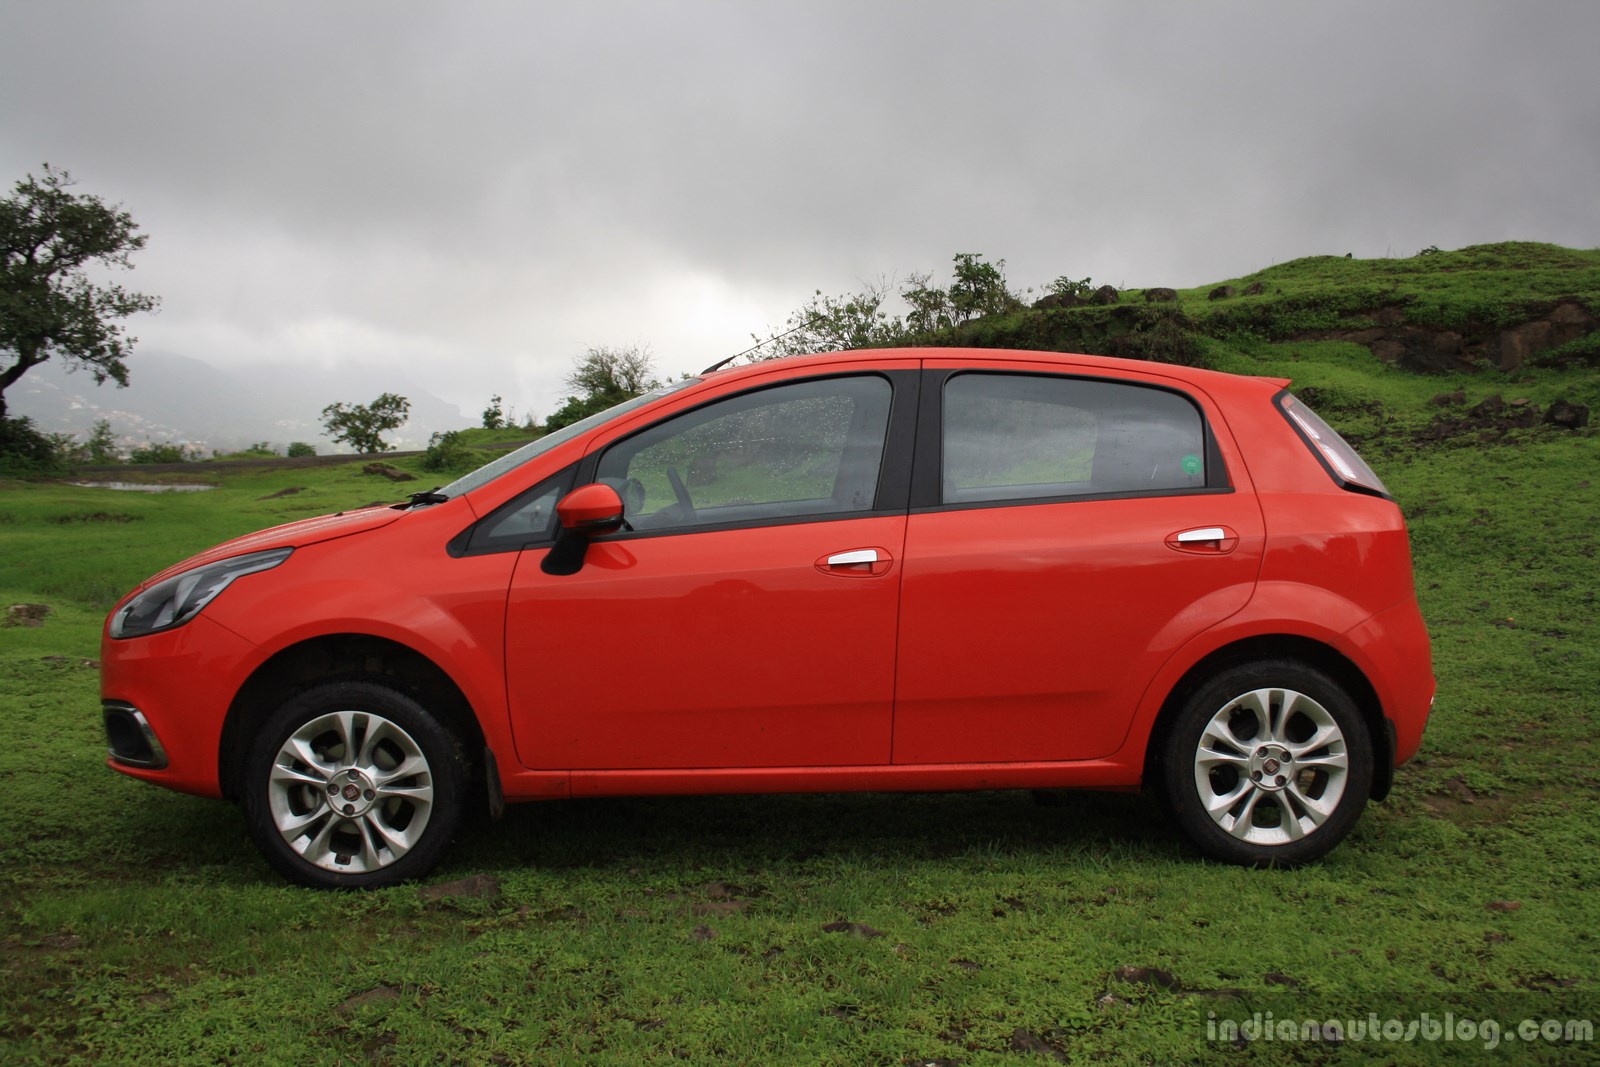 Fiat Punto Evo features and specifications